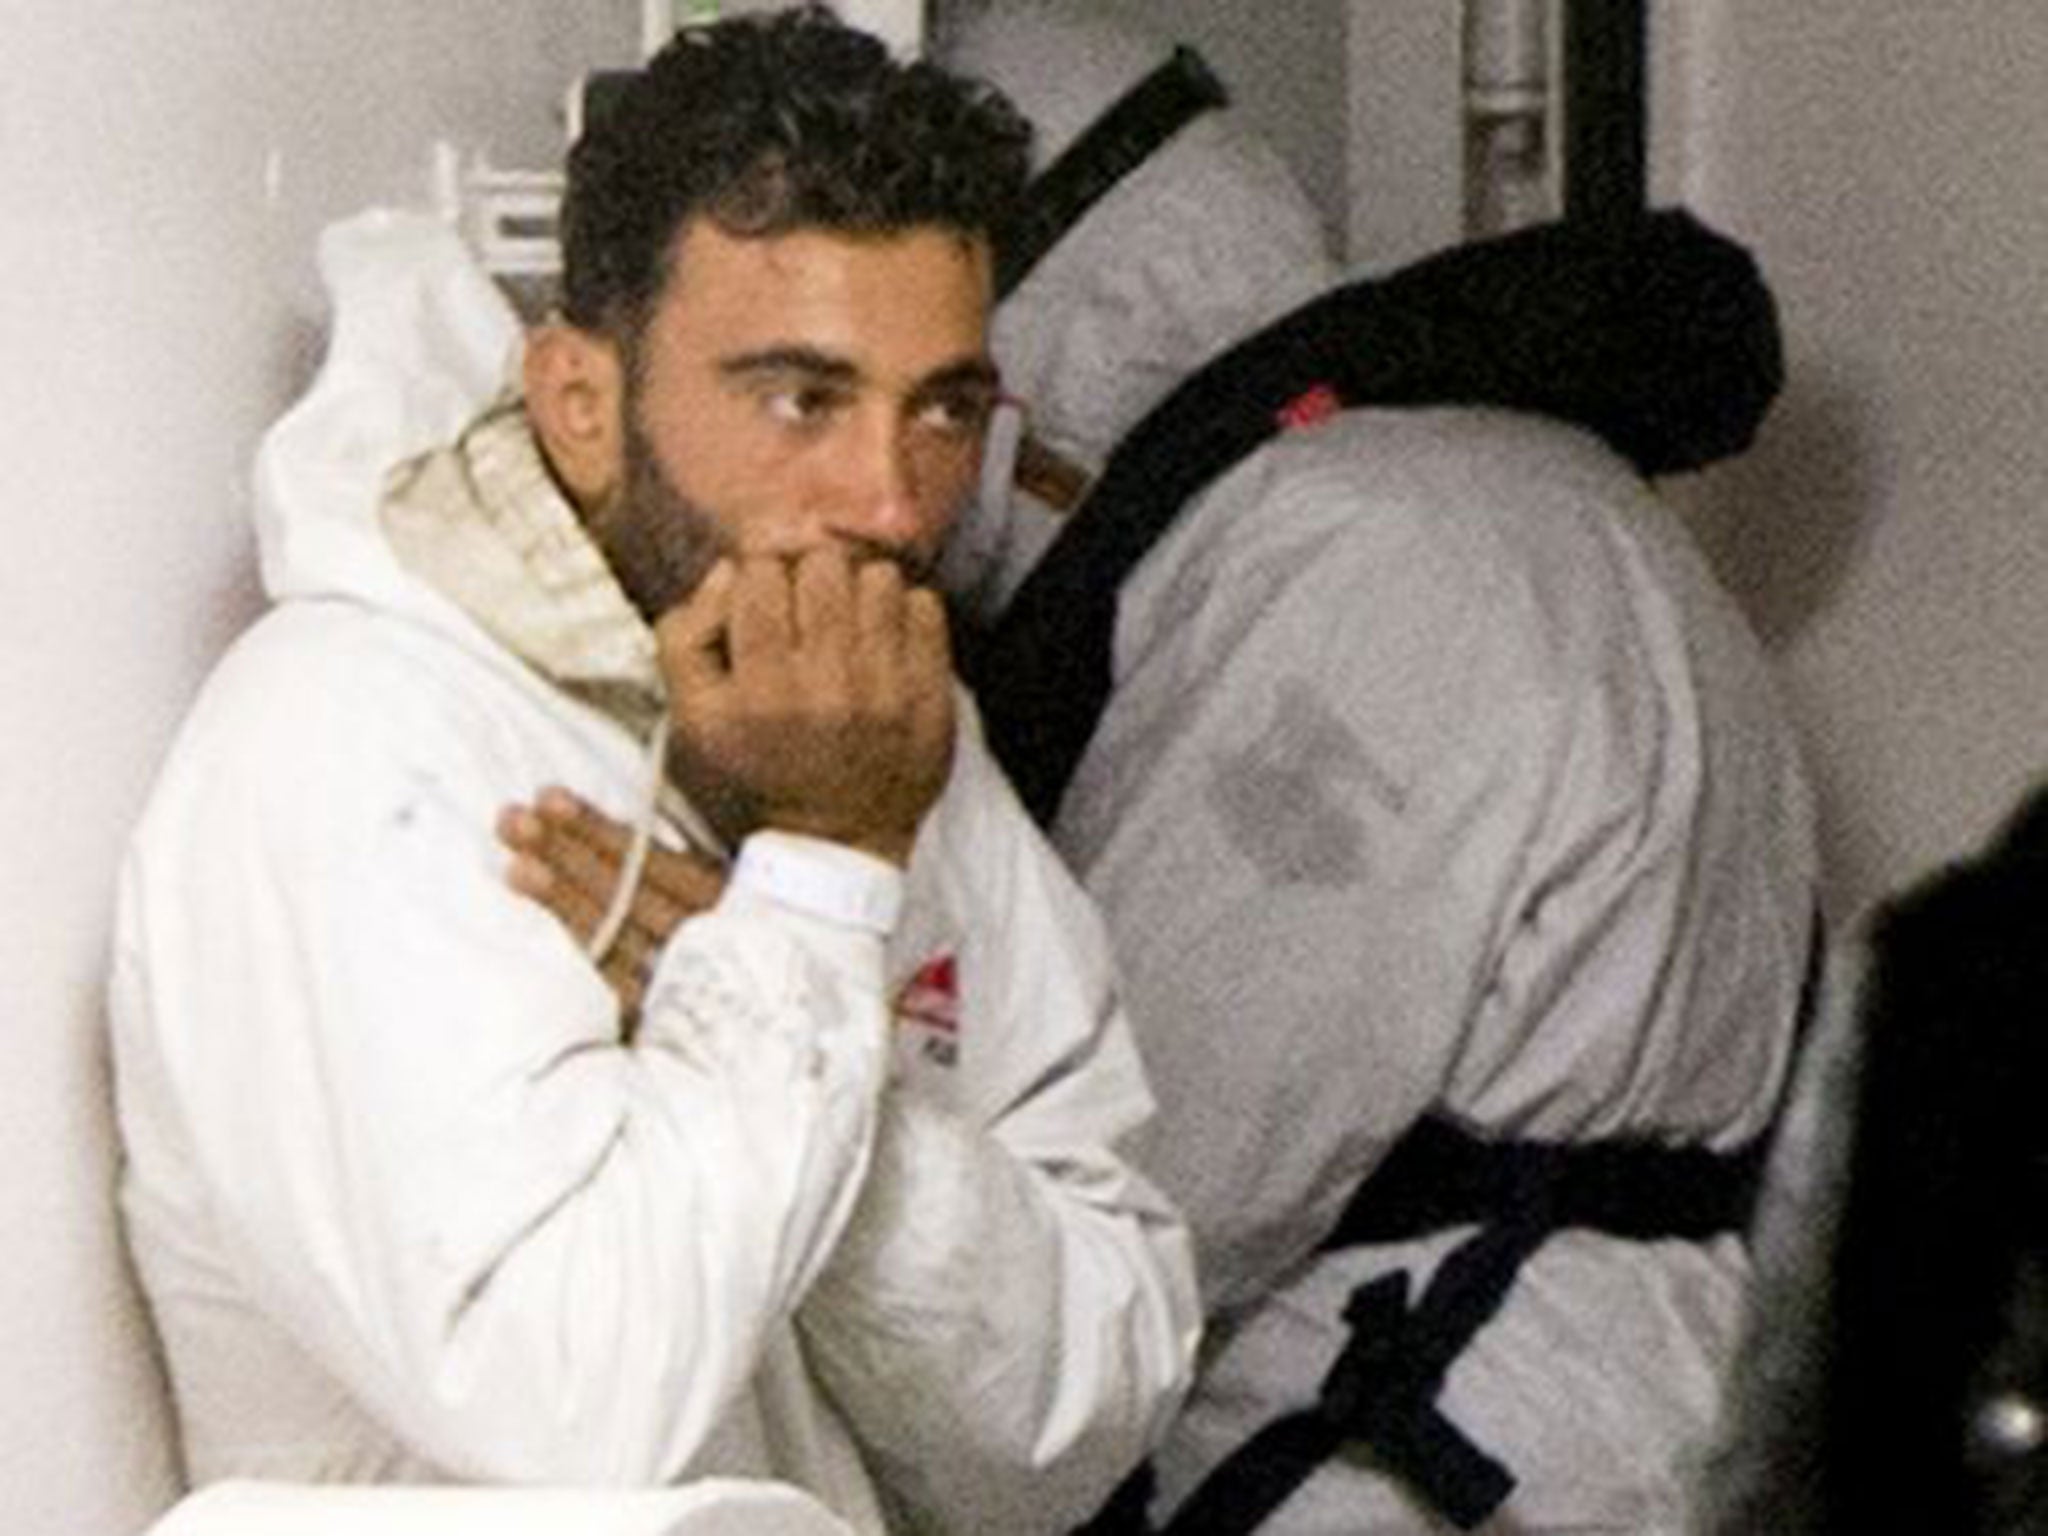 Mohammed Ali Malek has been charged with causing the deaths of hundreds of migrants who drowned after he steered the ship he was captaining into another vessel